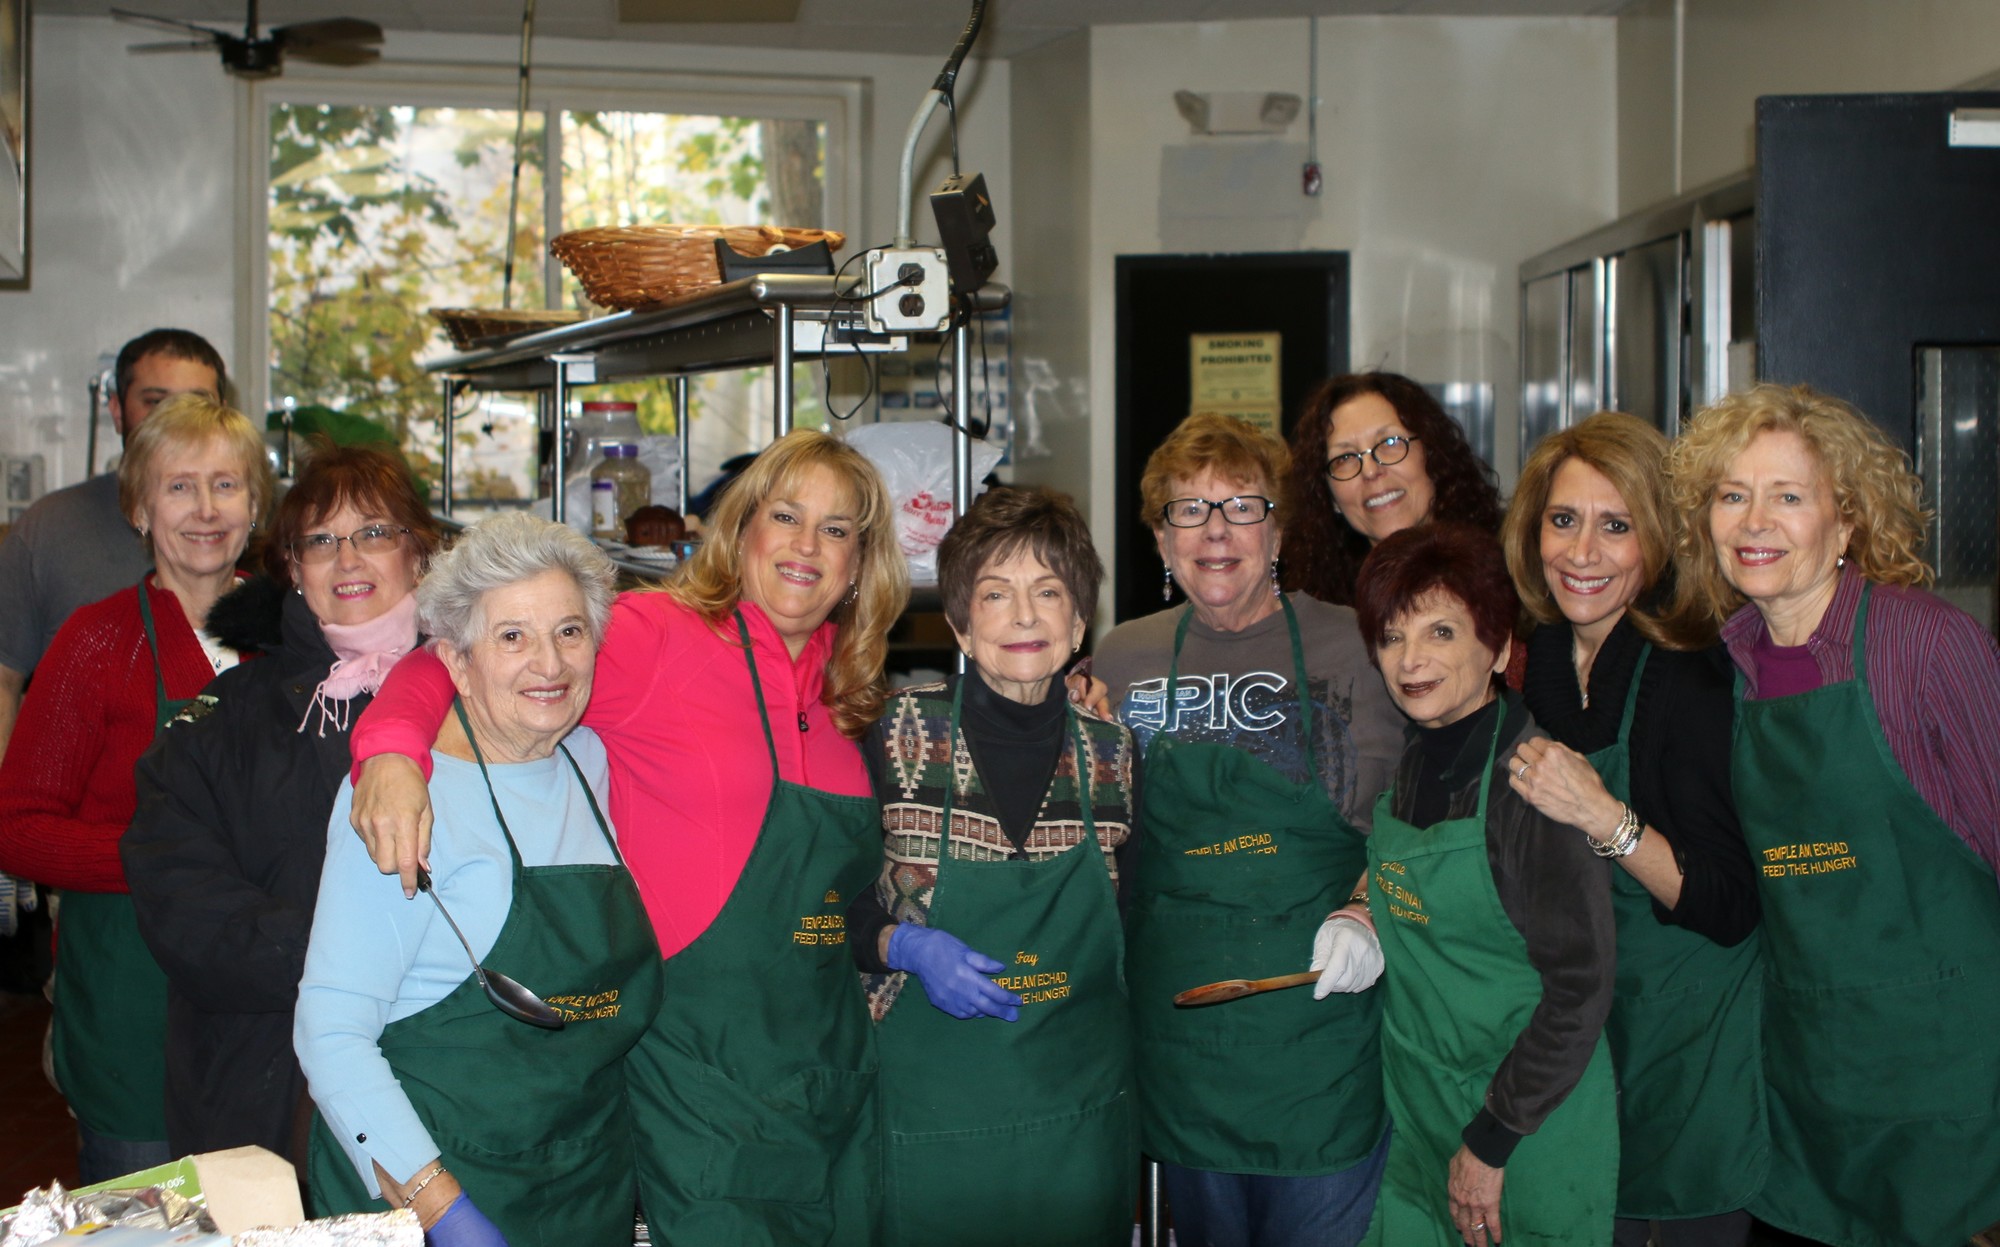 The Feed the Hungry Crew cooks meals every Wednesday.